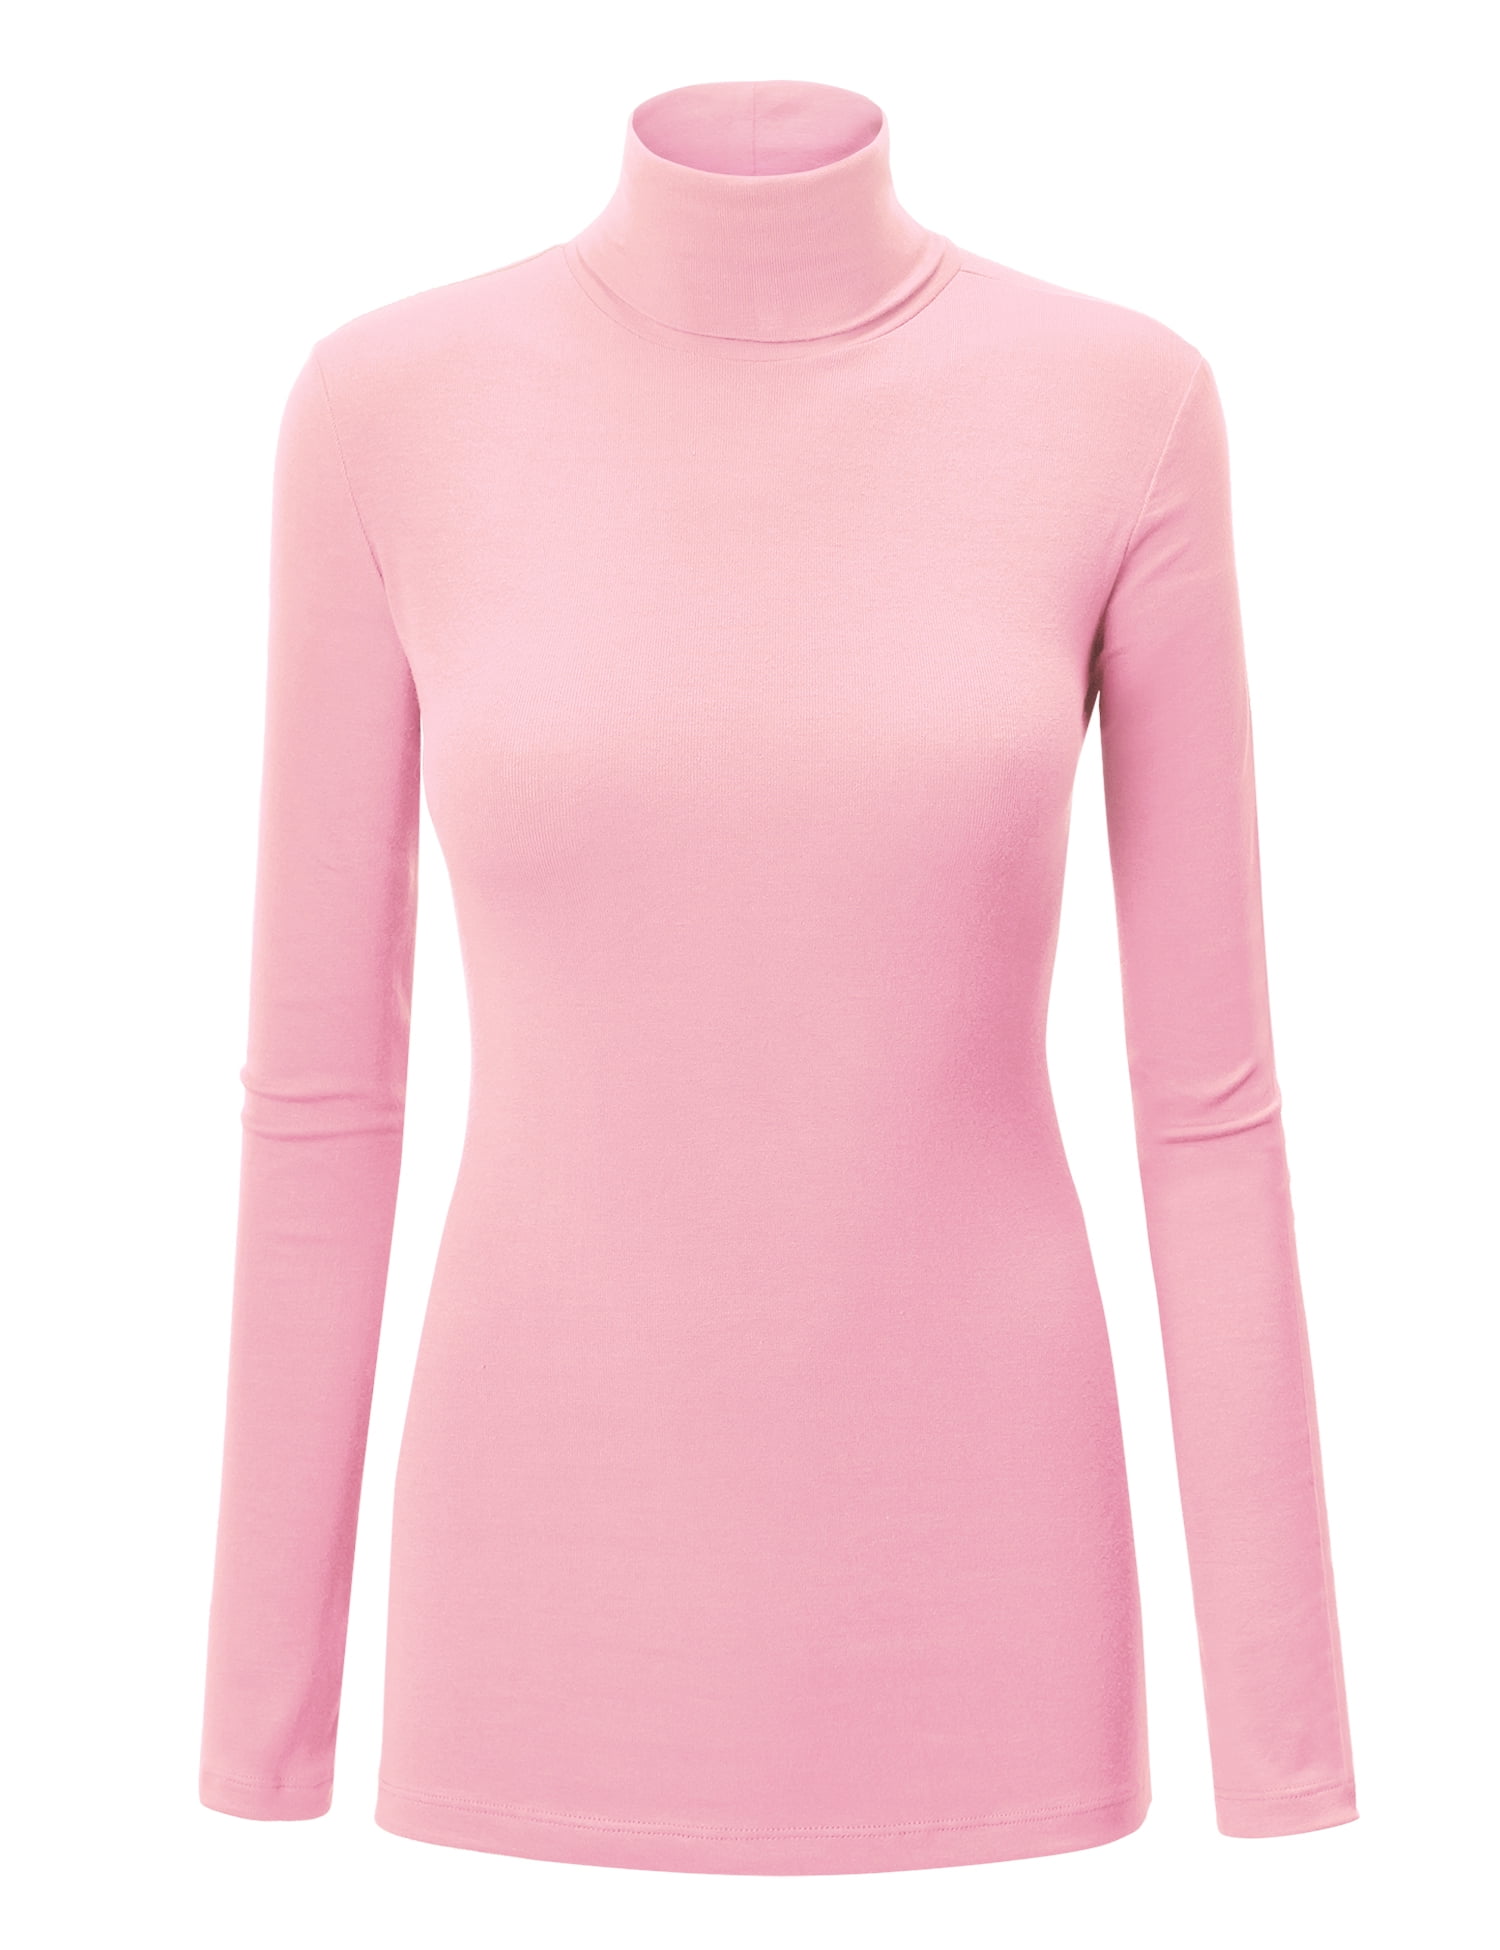 Made By Johnny Wt Womens Long Sleeve Rib Turtleneck Top Pullover